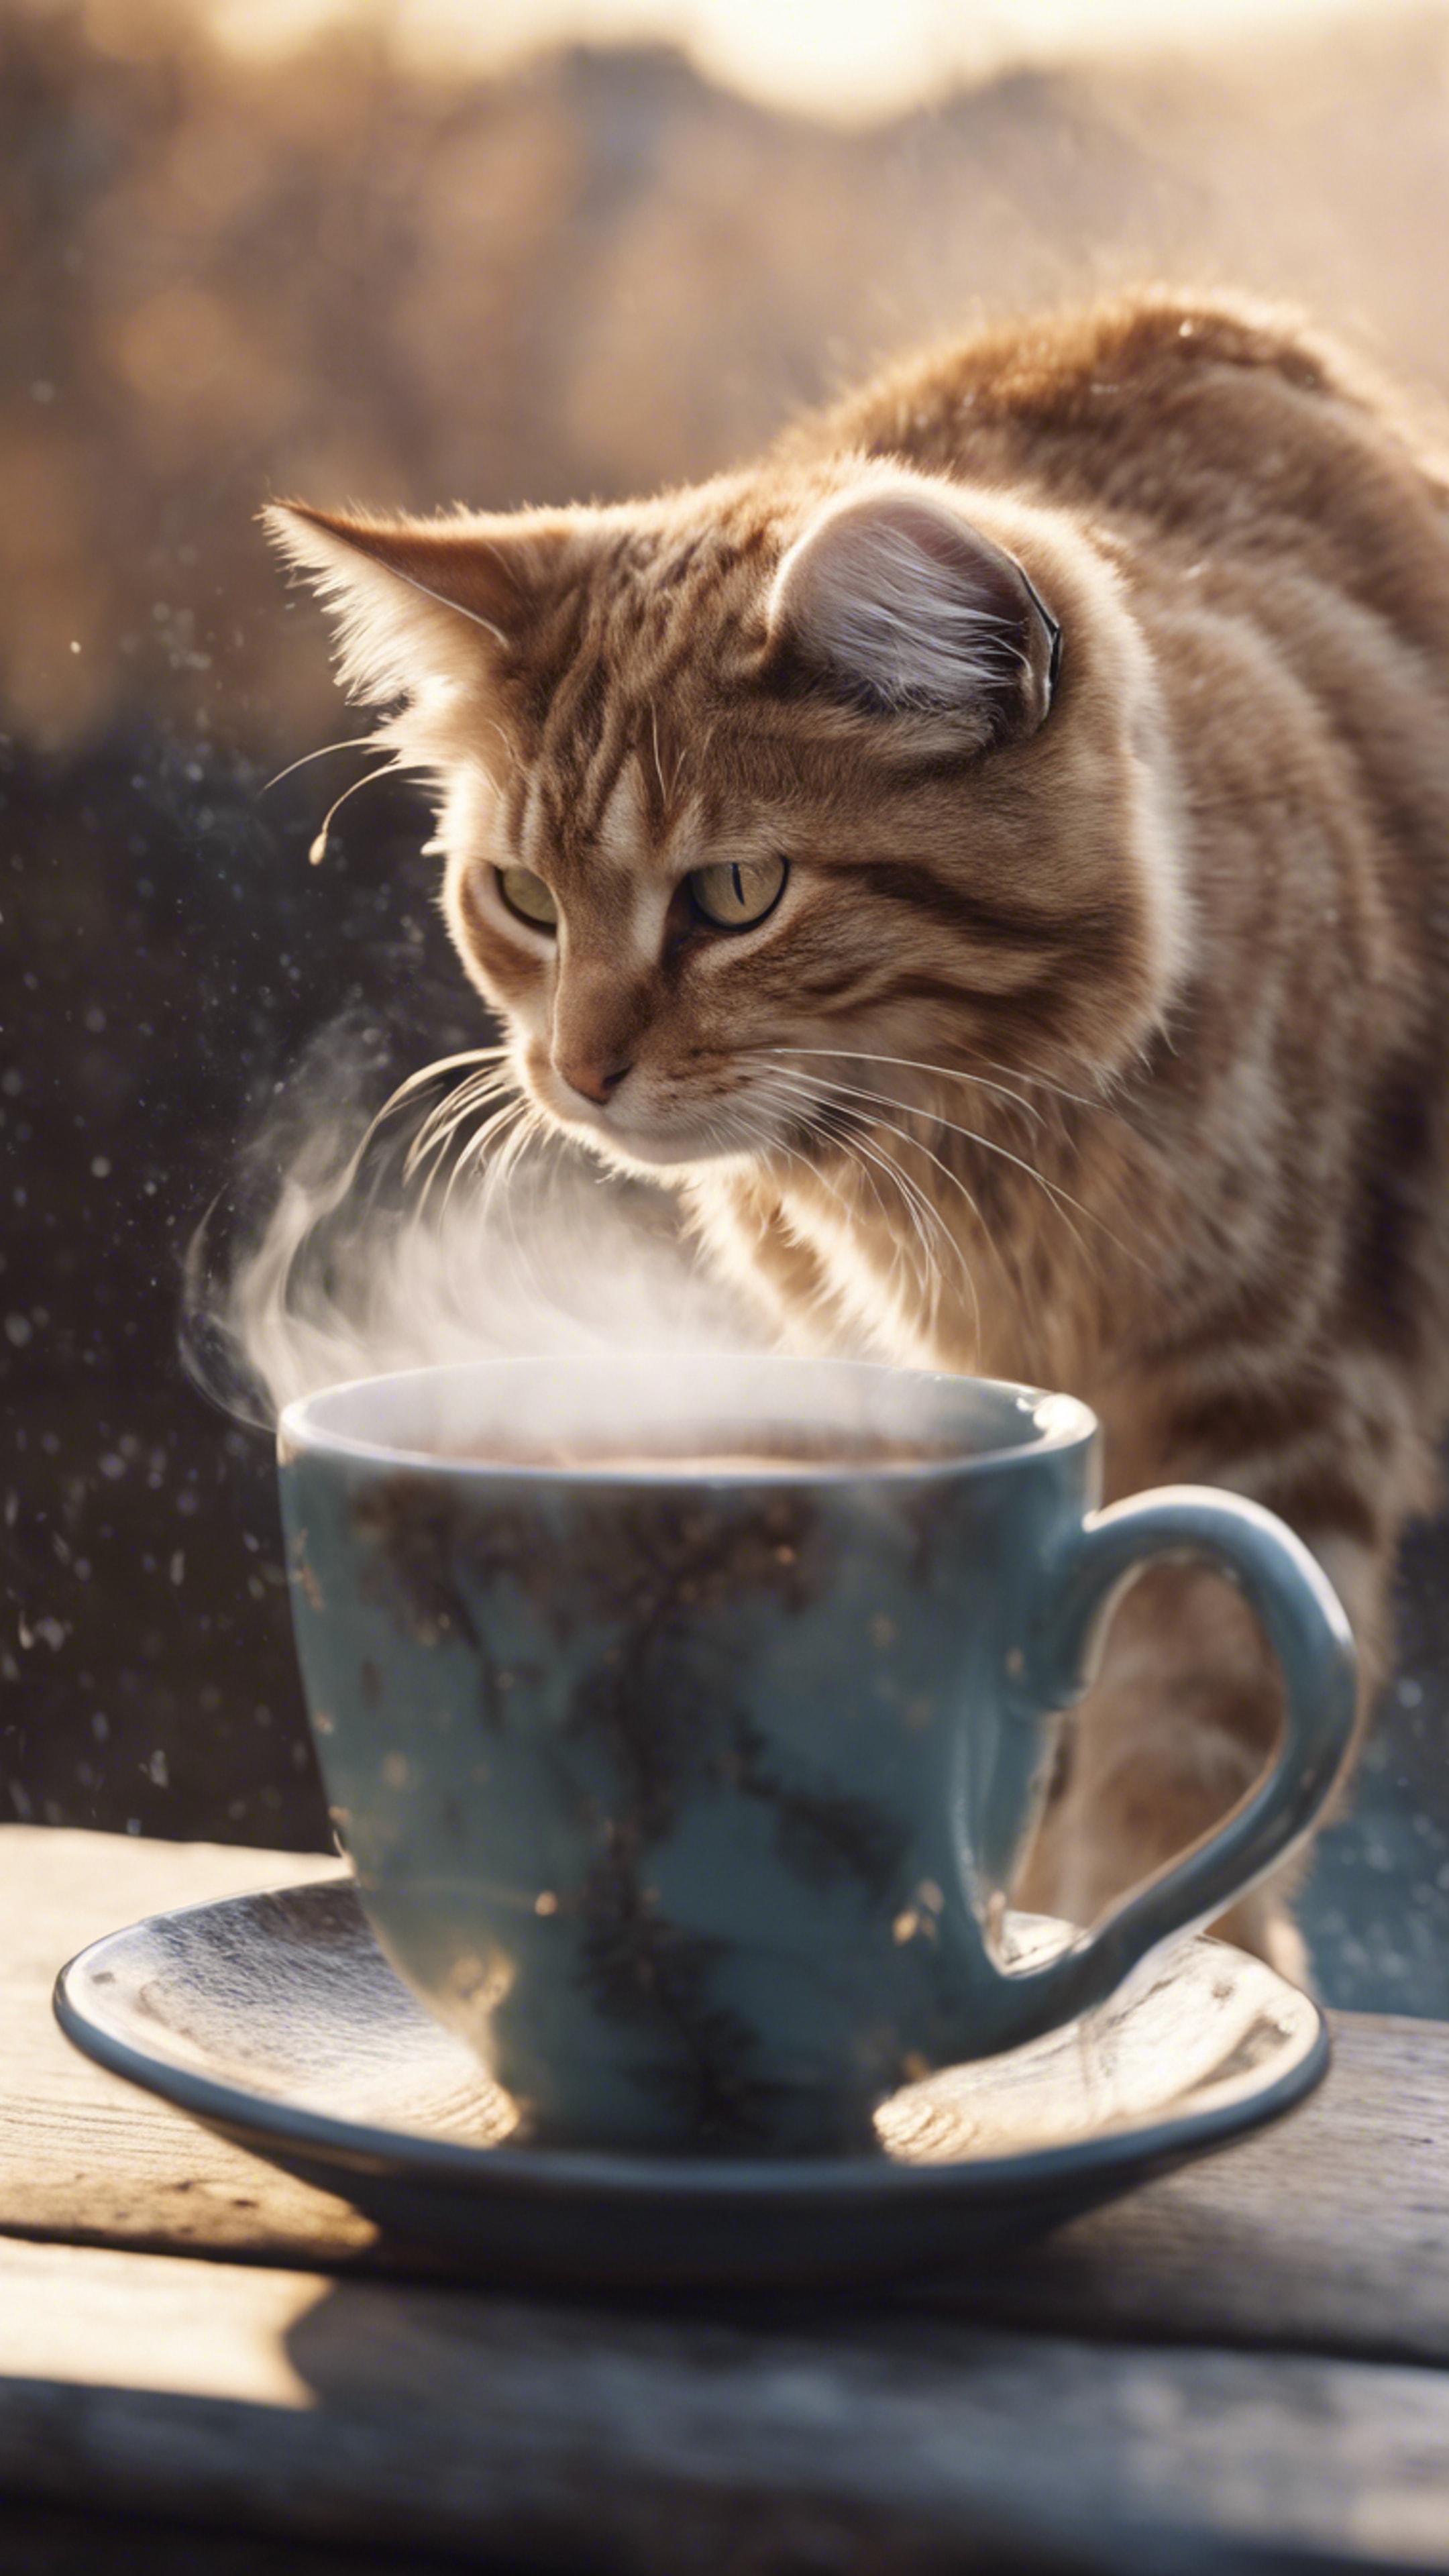 A lukewarm cup of coffee, with a steam motif of a cat hissing against a chilly winter morning. Tapet[d53de69744a34ba58639]